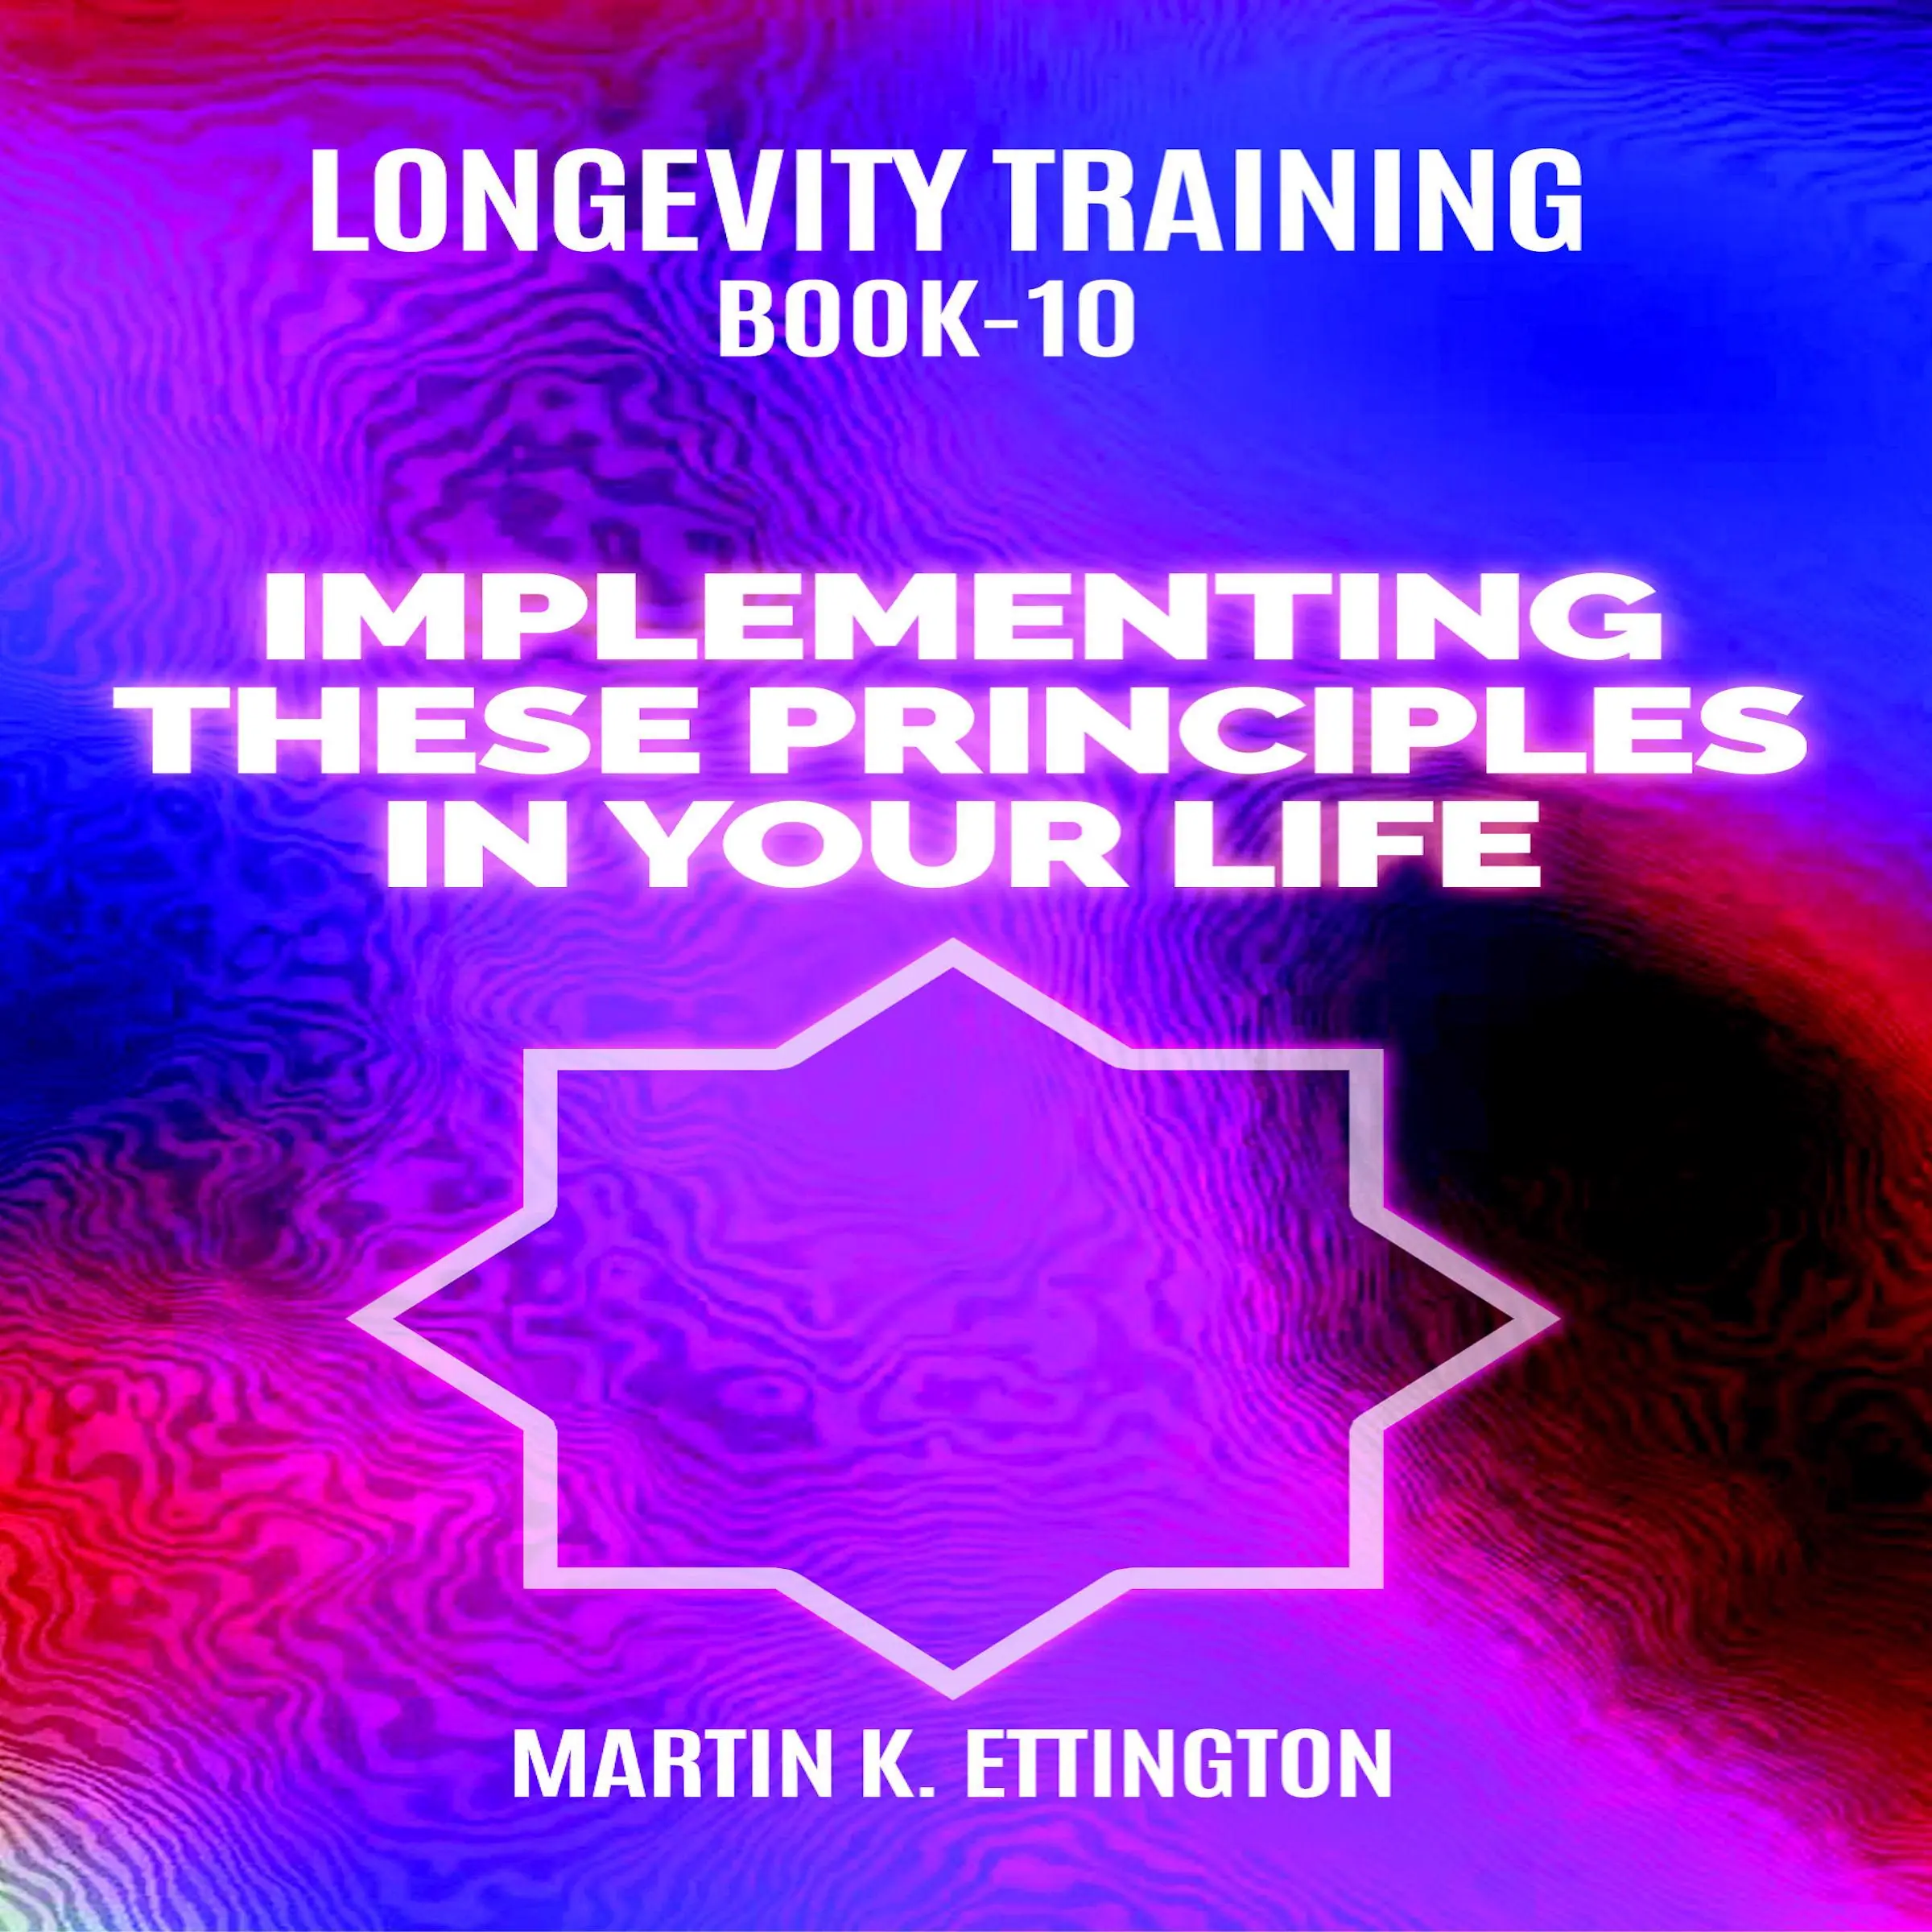 Longevity Training Book-10 Implementing These Principles In Your Life Audiobook by Martin K Ettington